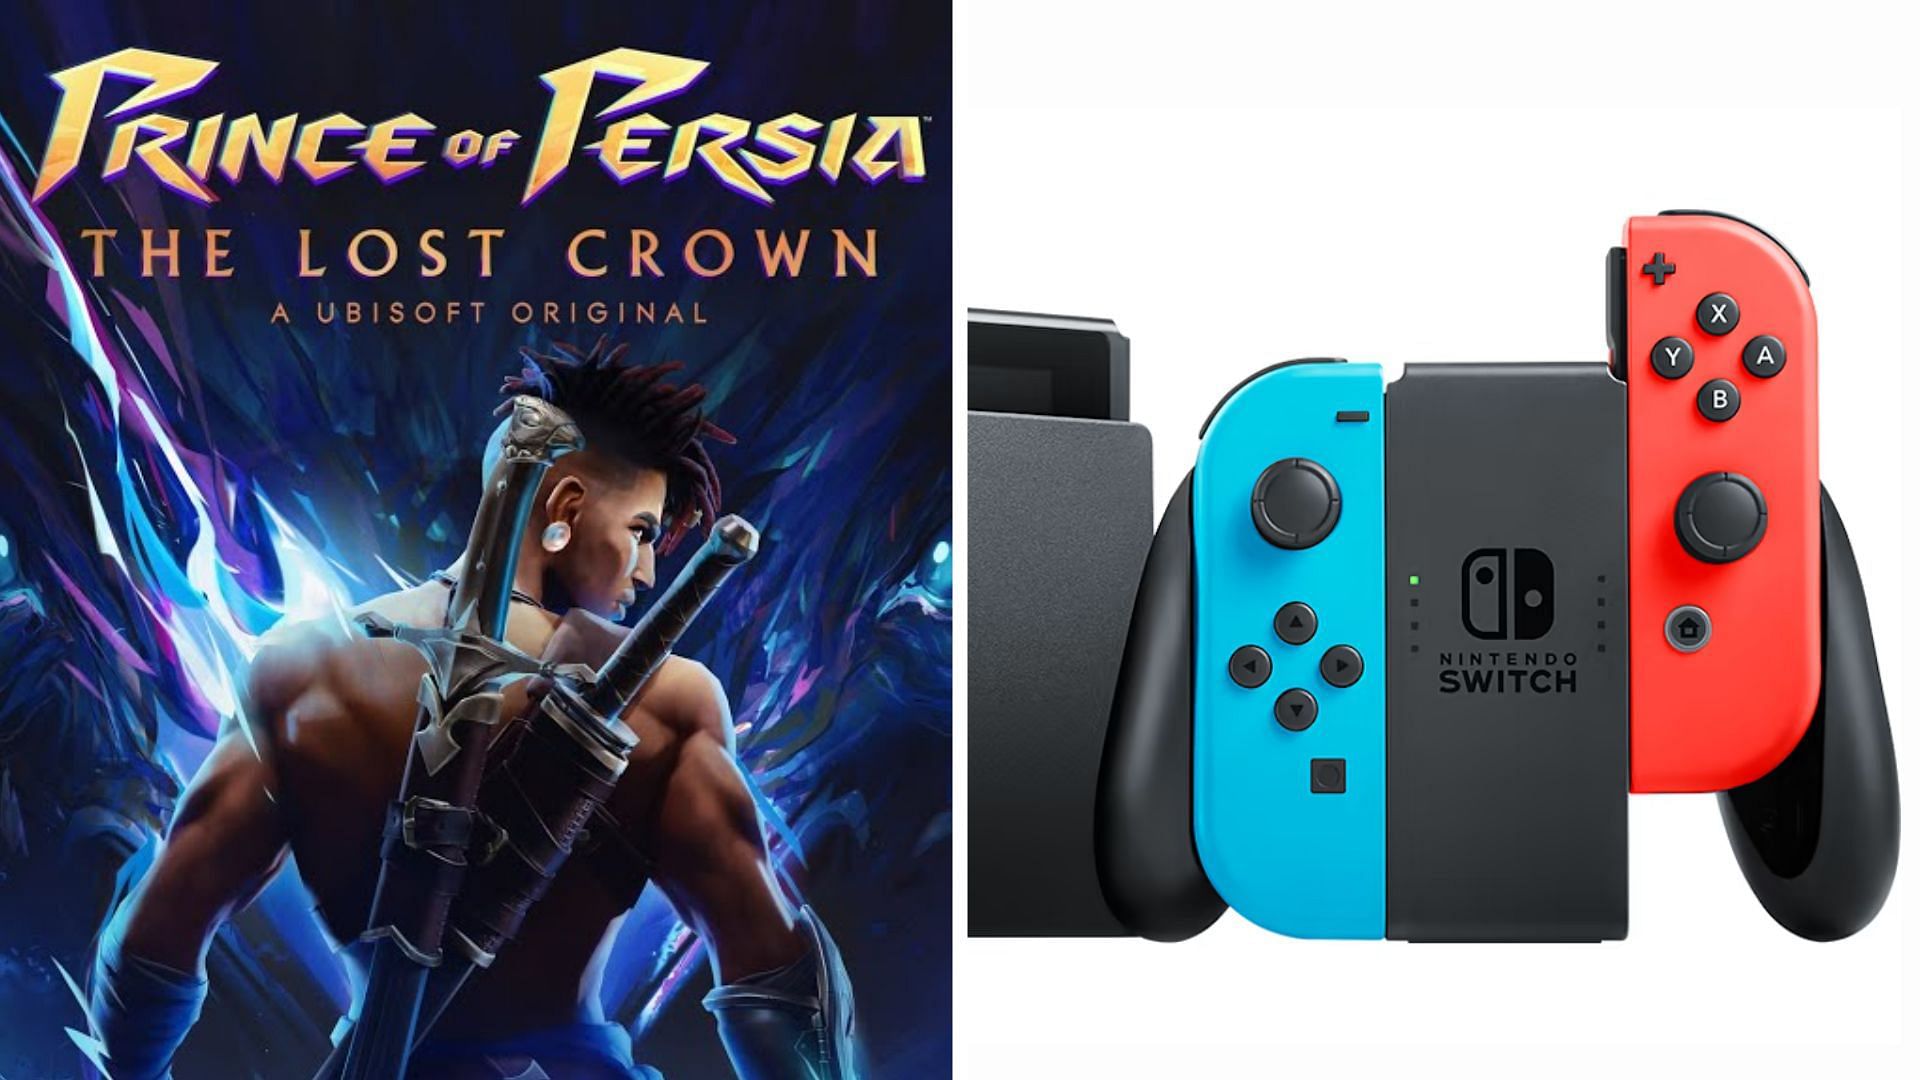 Is Prince of Persia: The Lost Crown worth playing on Switch?